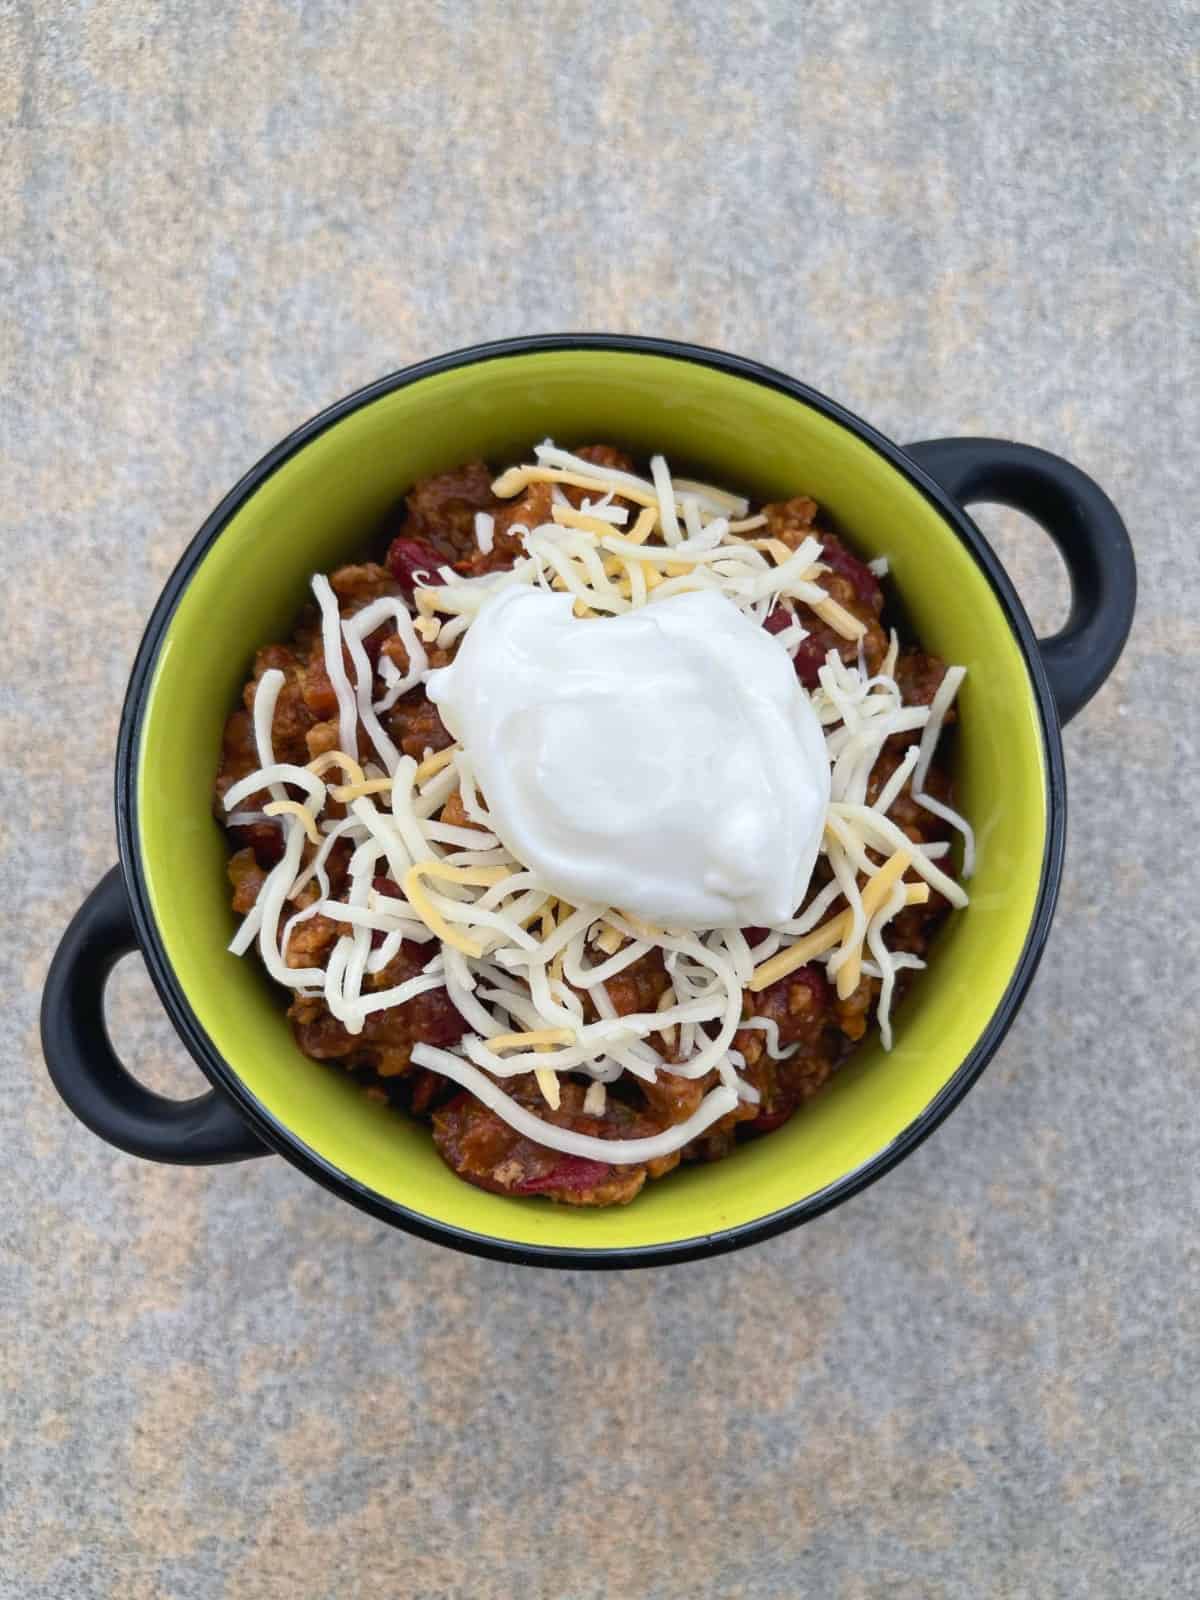 Meatless Quorn Chili